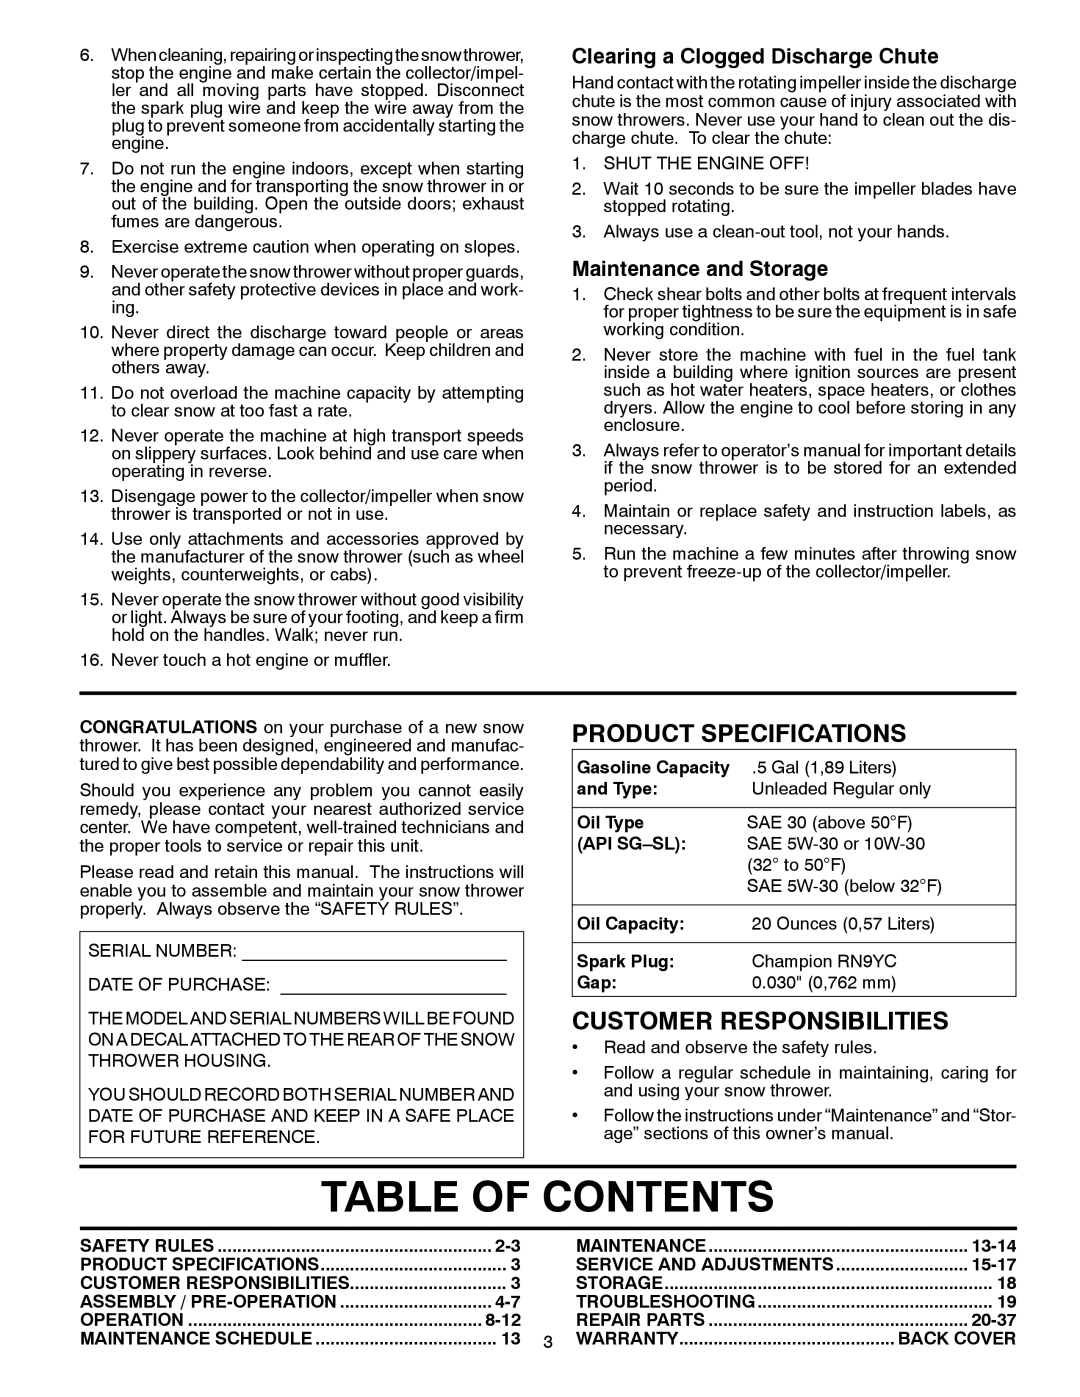 Poulan 96198002601 Table Of Contents, Product Specifications, Customer Responsibilities, Maintenance and Storage, and Type 